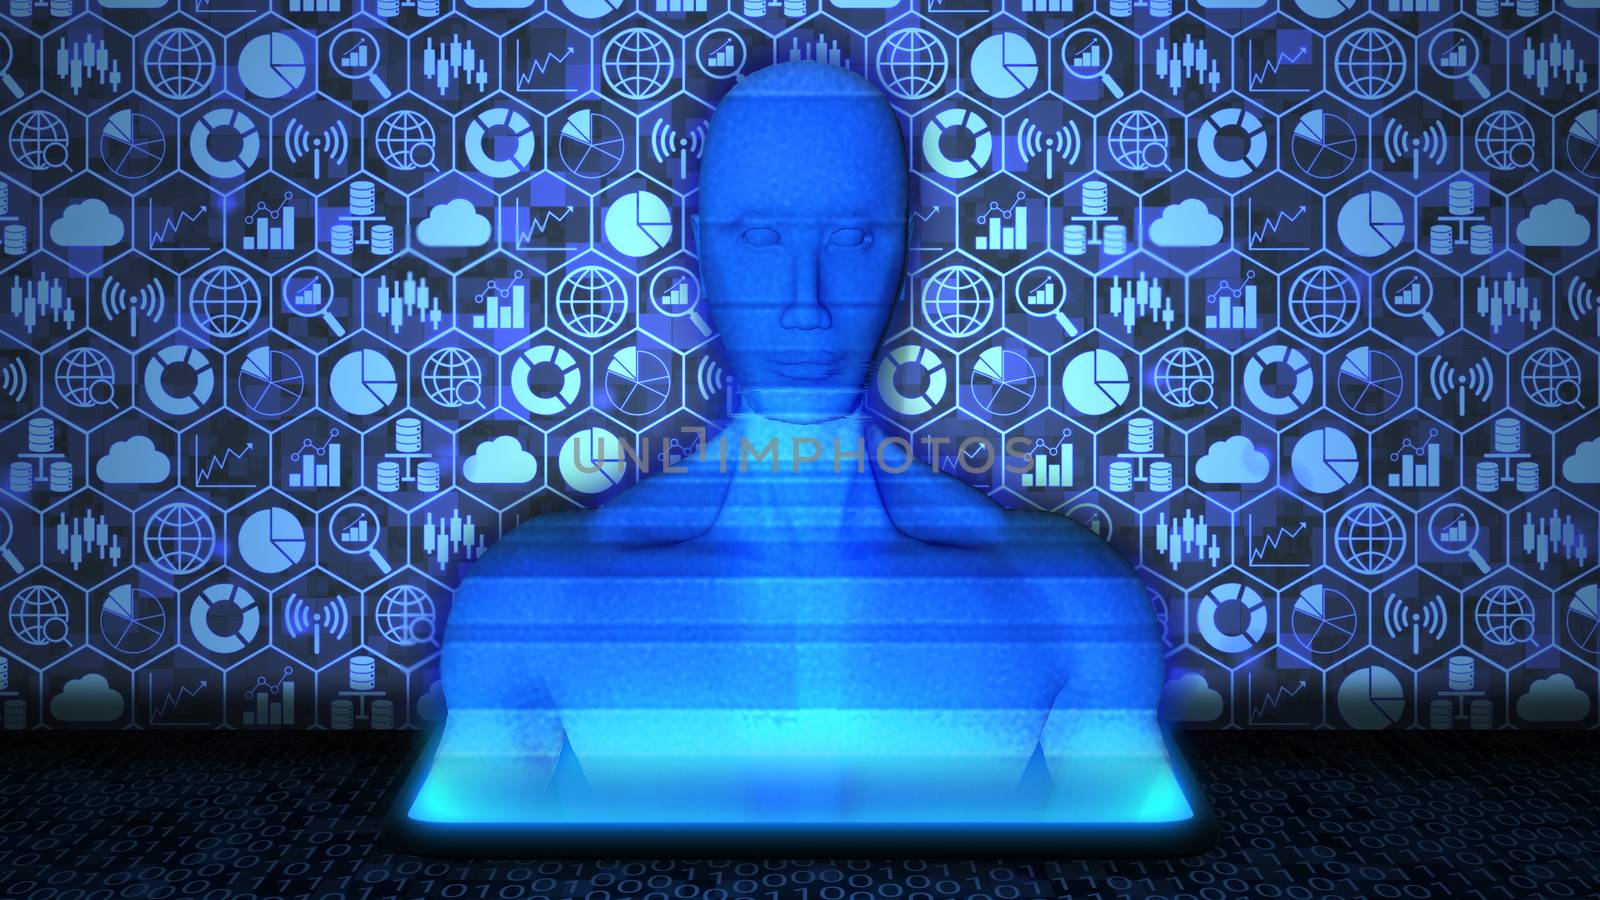 8K 3D Rendered AI/Human Hologram projected from Smartphone on the floor with Big Data Technology icon set Background and Random Binary Code on the floor in blue color by ariya23156